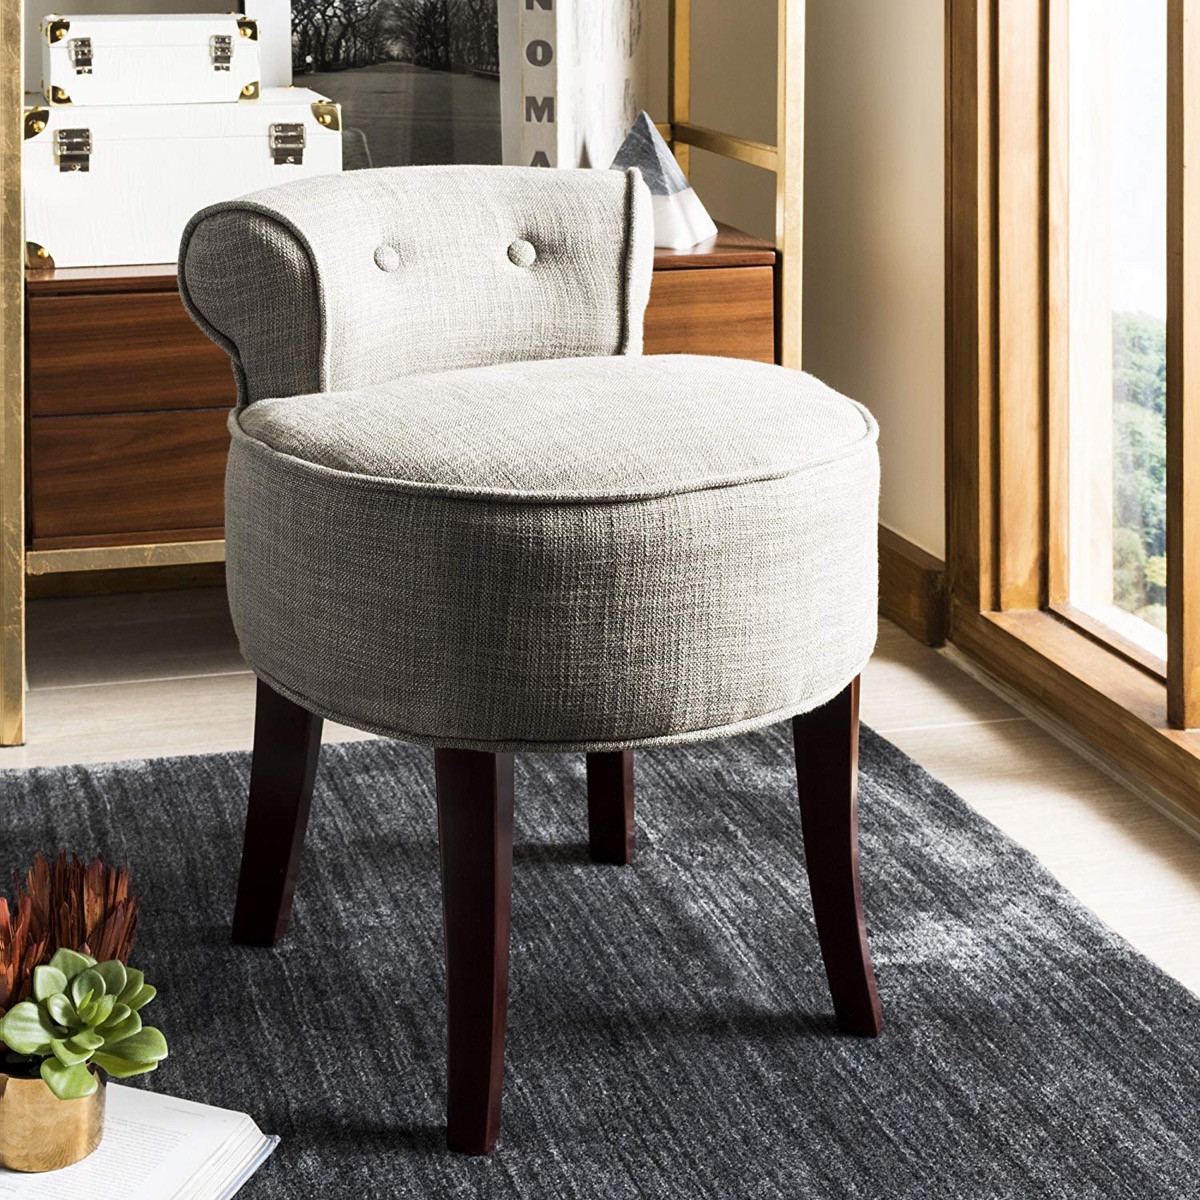 https://www.home-designing.com/wp-content/uploads/2019/08/grey-vanity-stool-chair-with-short-back-and-solid-wood-legs.jpg